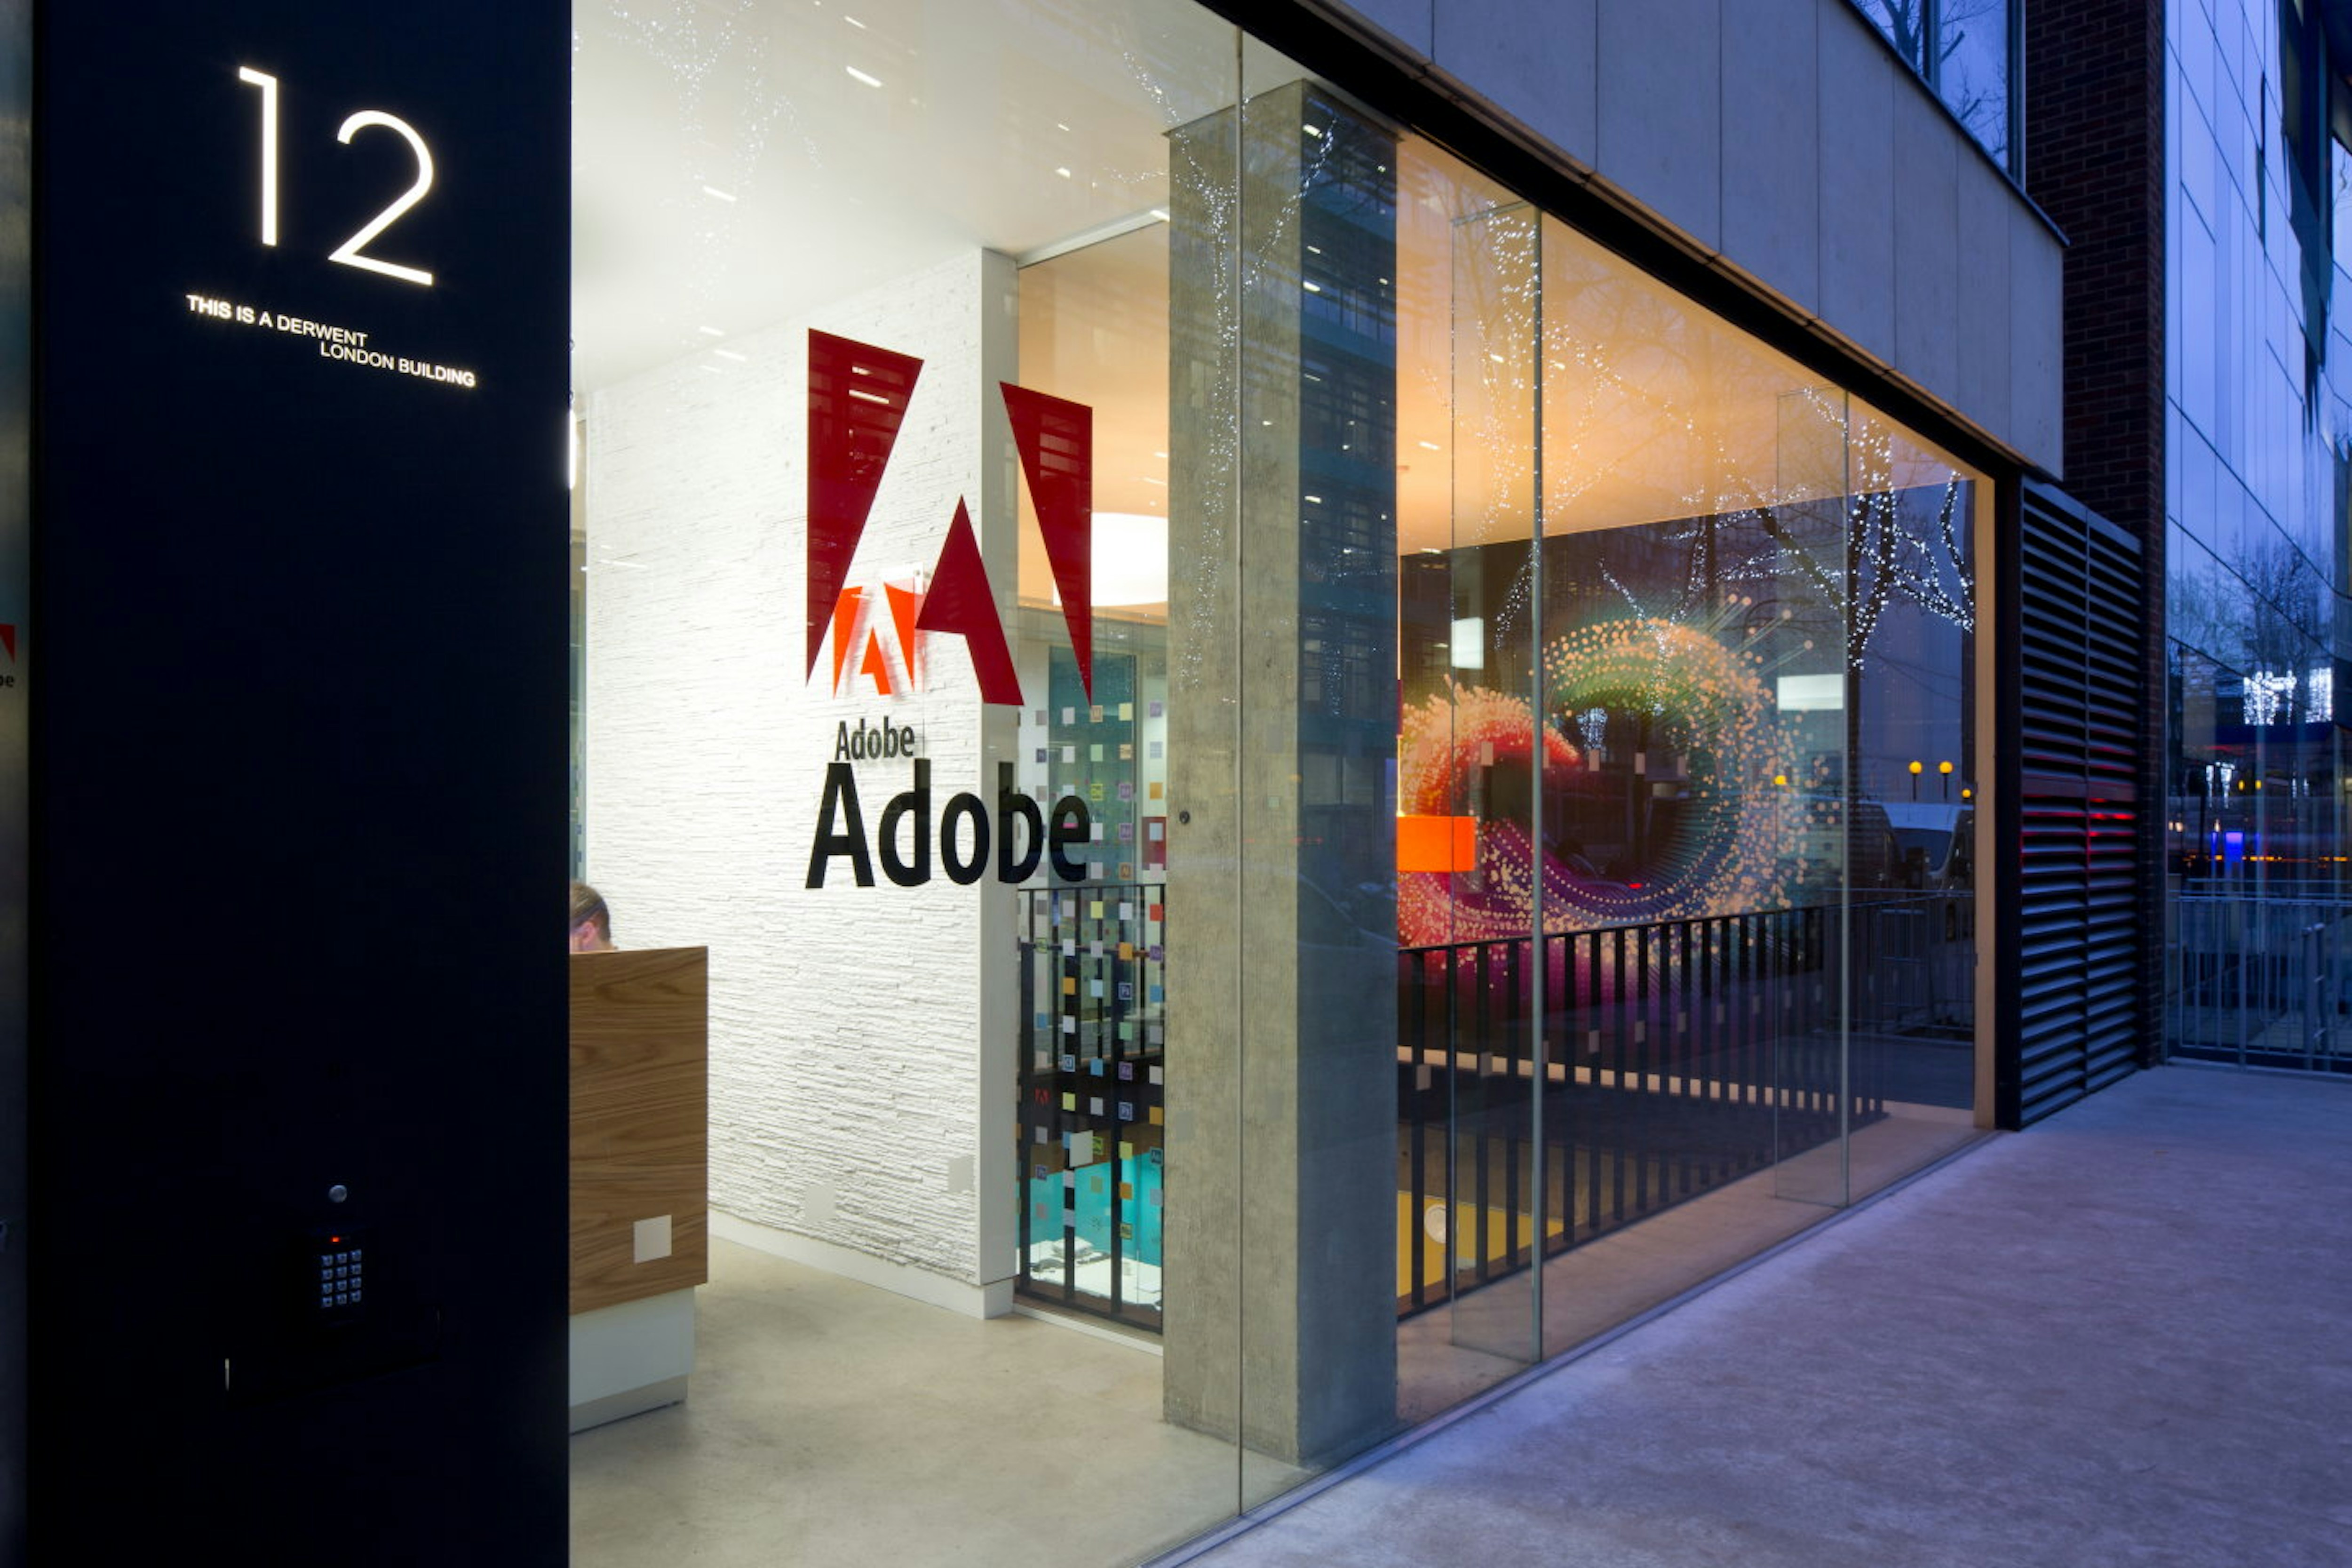 Glass facade revealing a stylish and creative workspace - Adobe